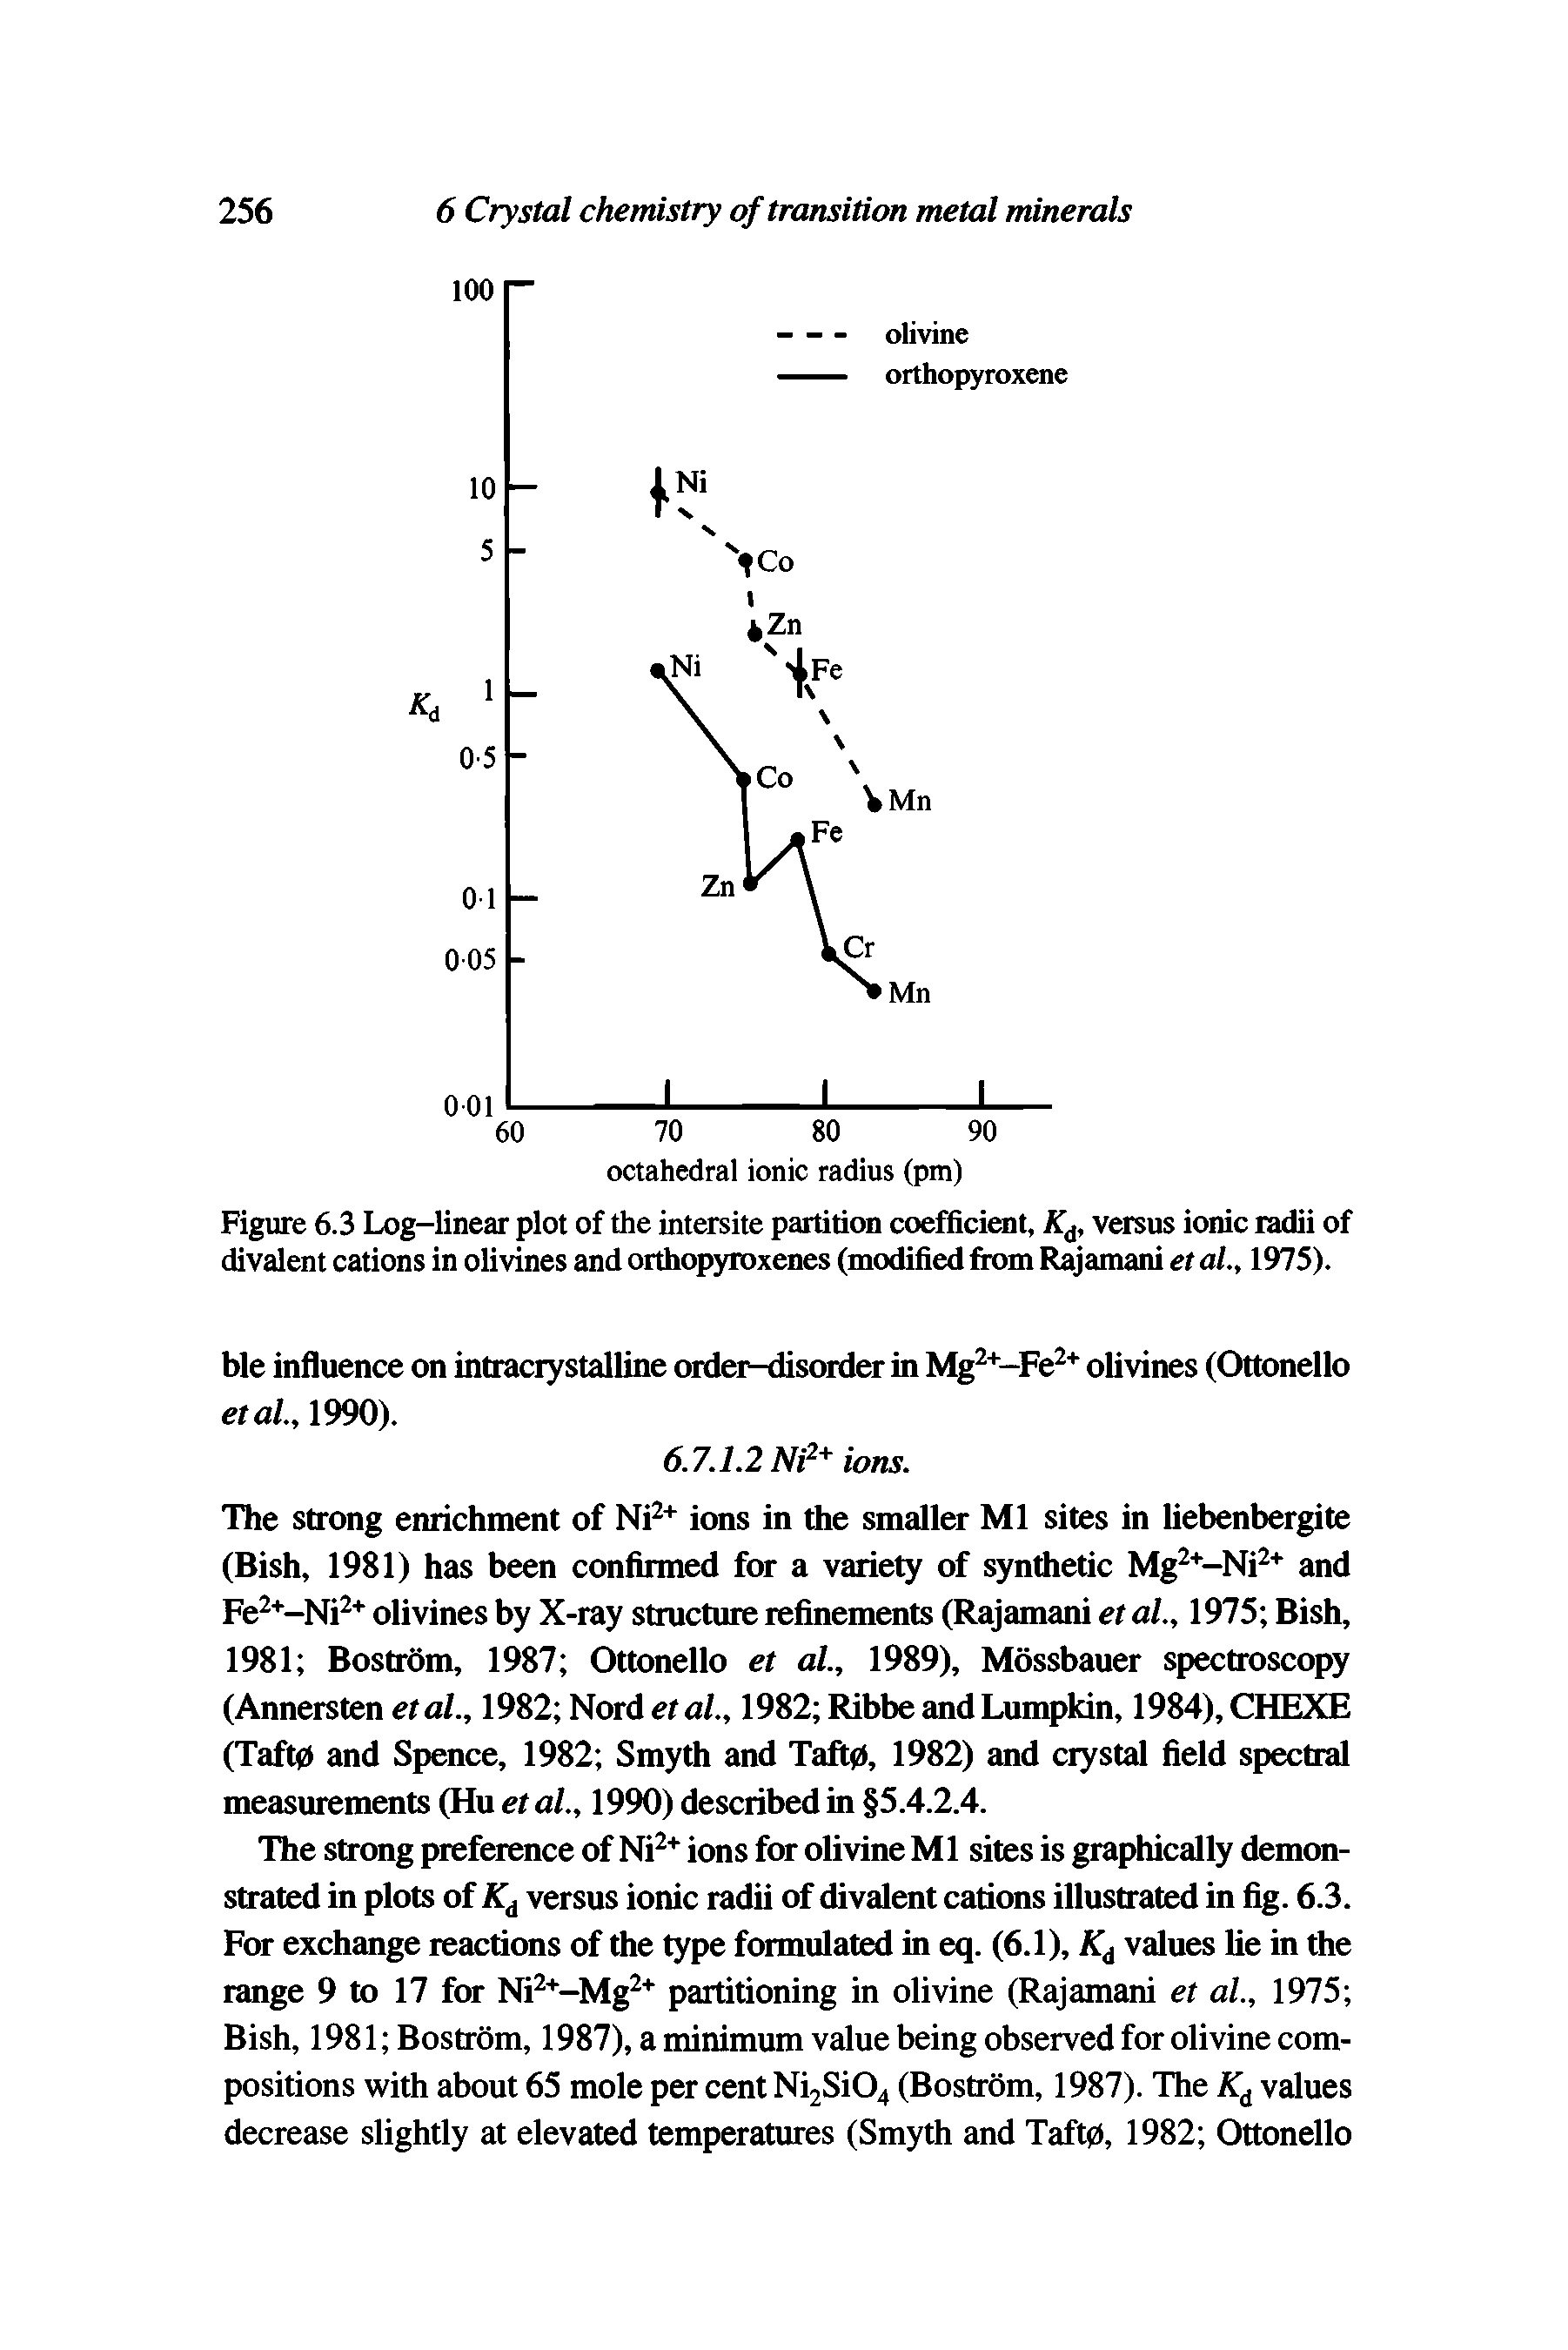 Figure 6.3 Log-linear plot of the intersite partition coefficient, Kd, versus ionic radii of divalent cations in olivines and orthopyroxenes (modified from Rajamani et al., 1975).